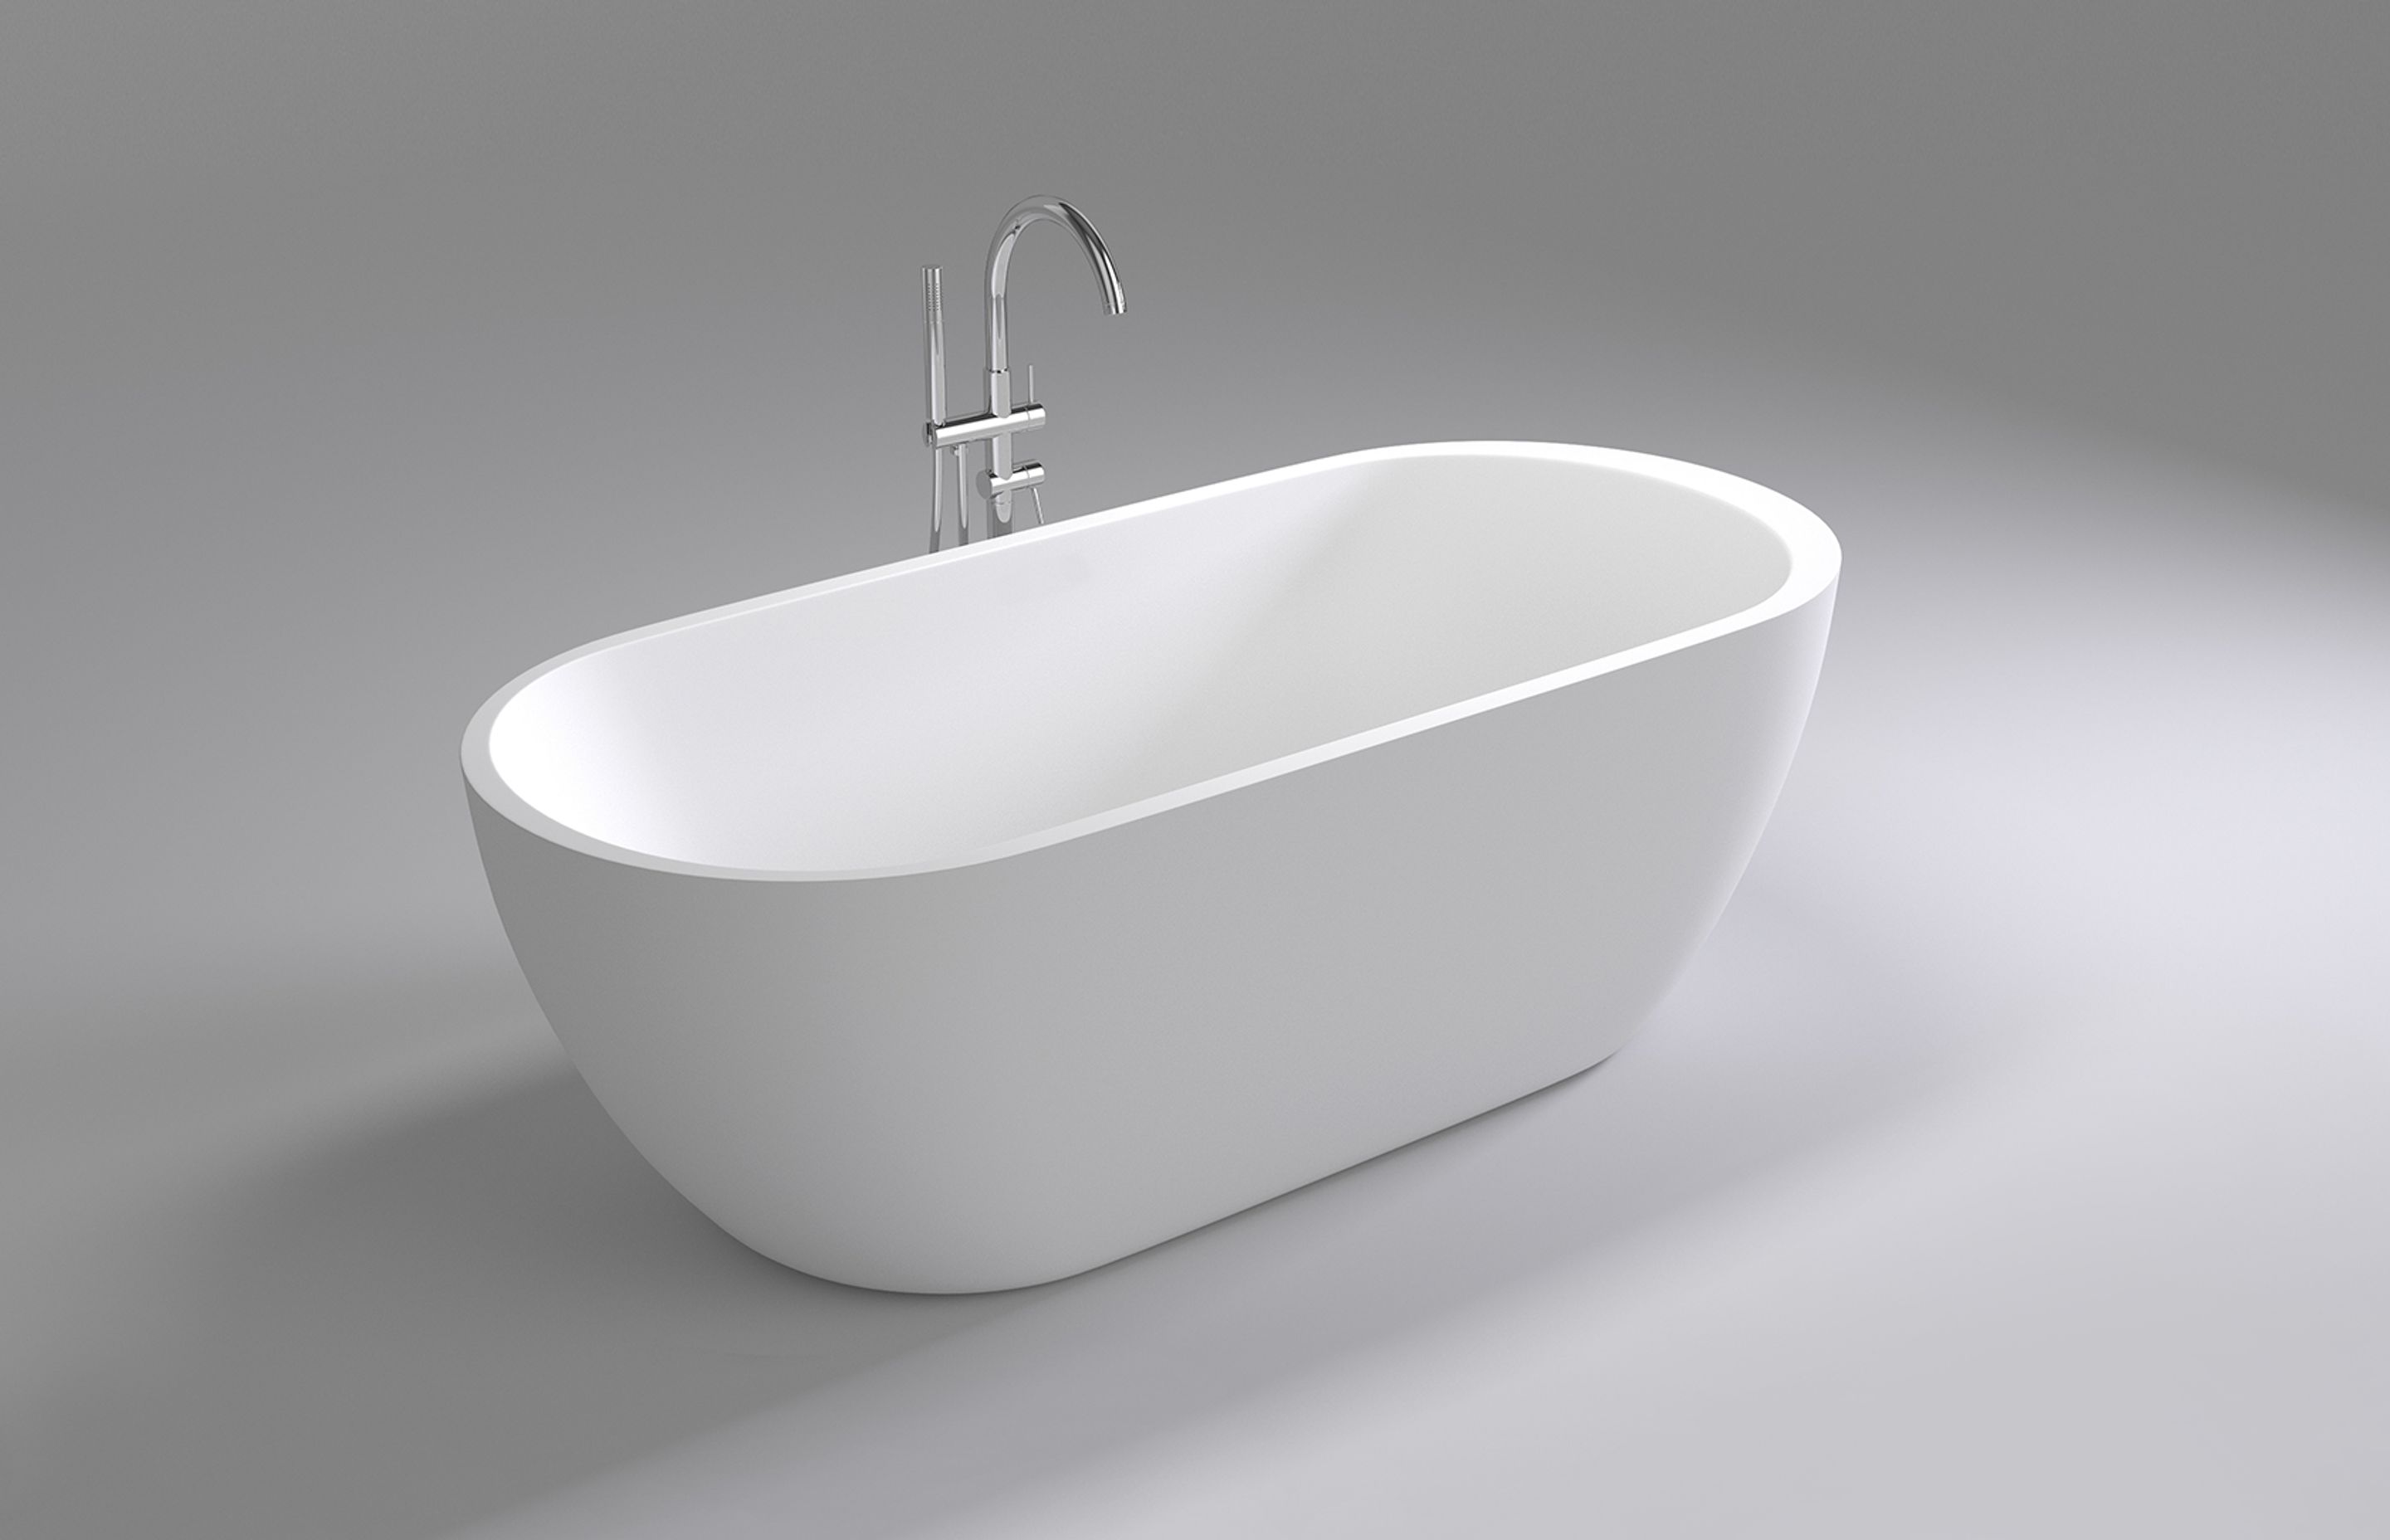 Baths: Selecting the right material for you